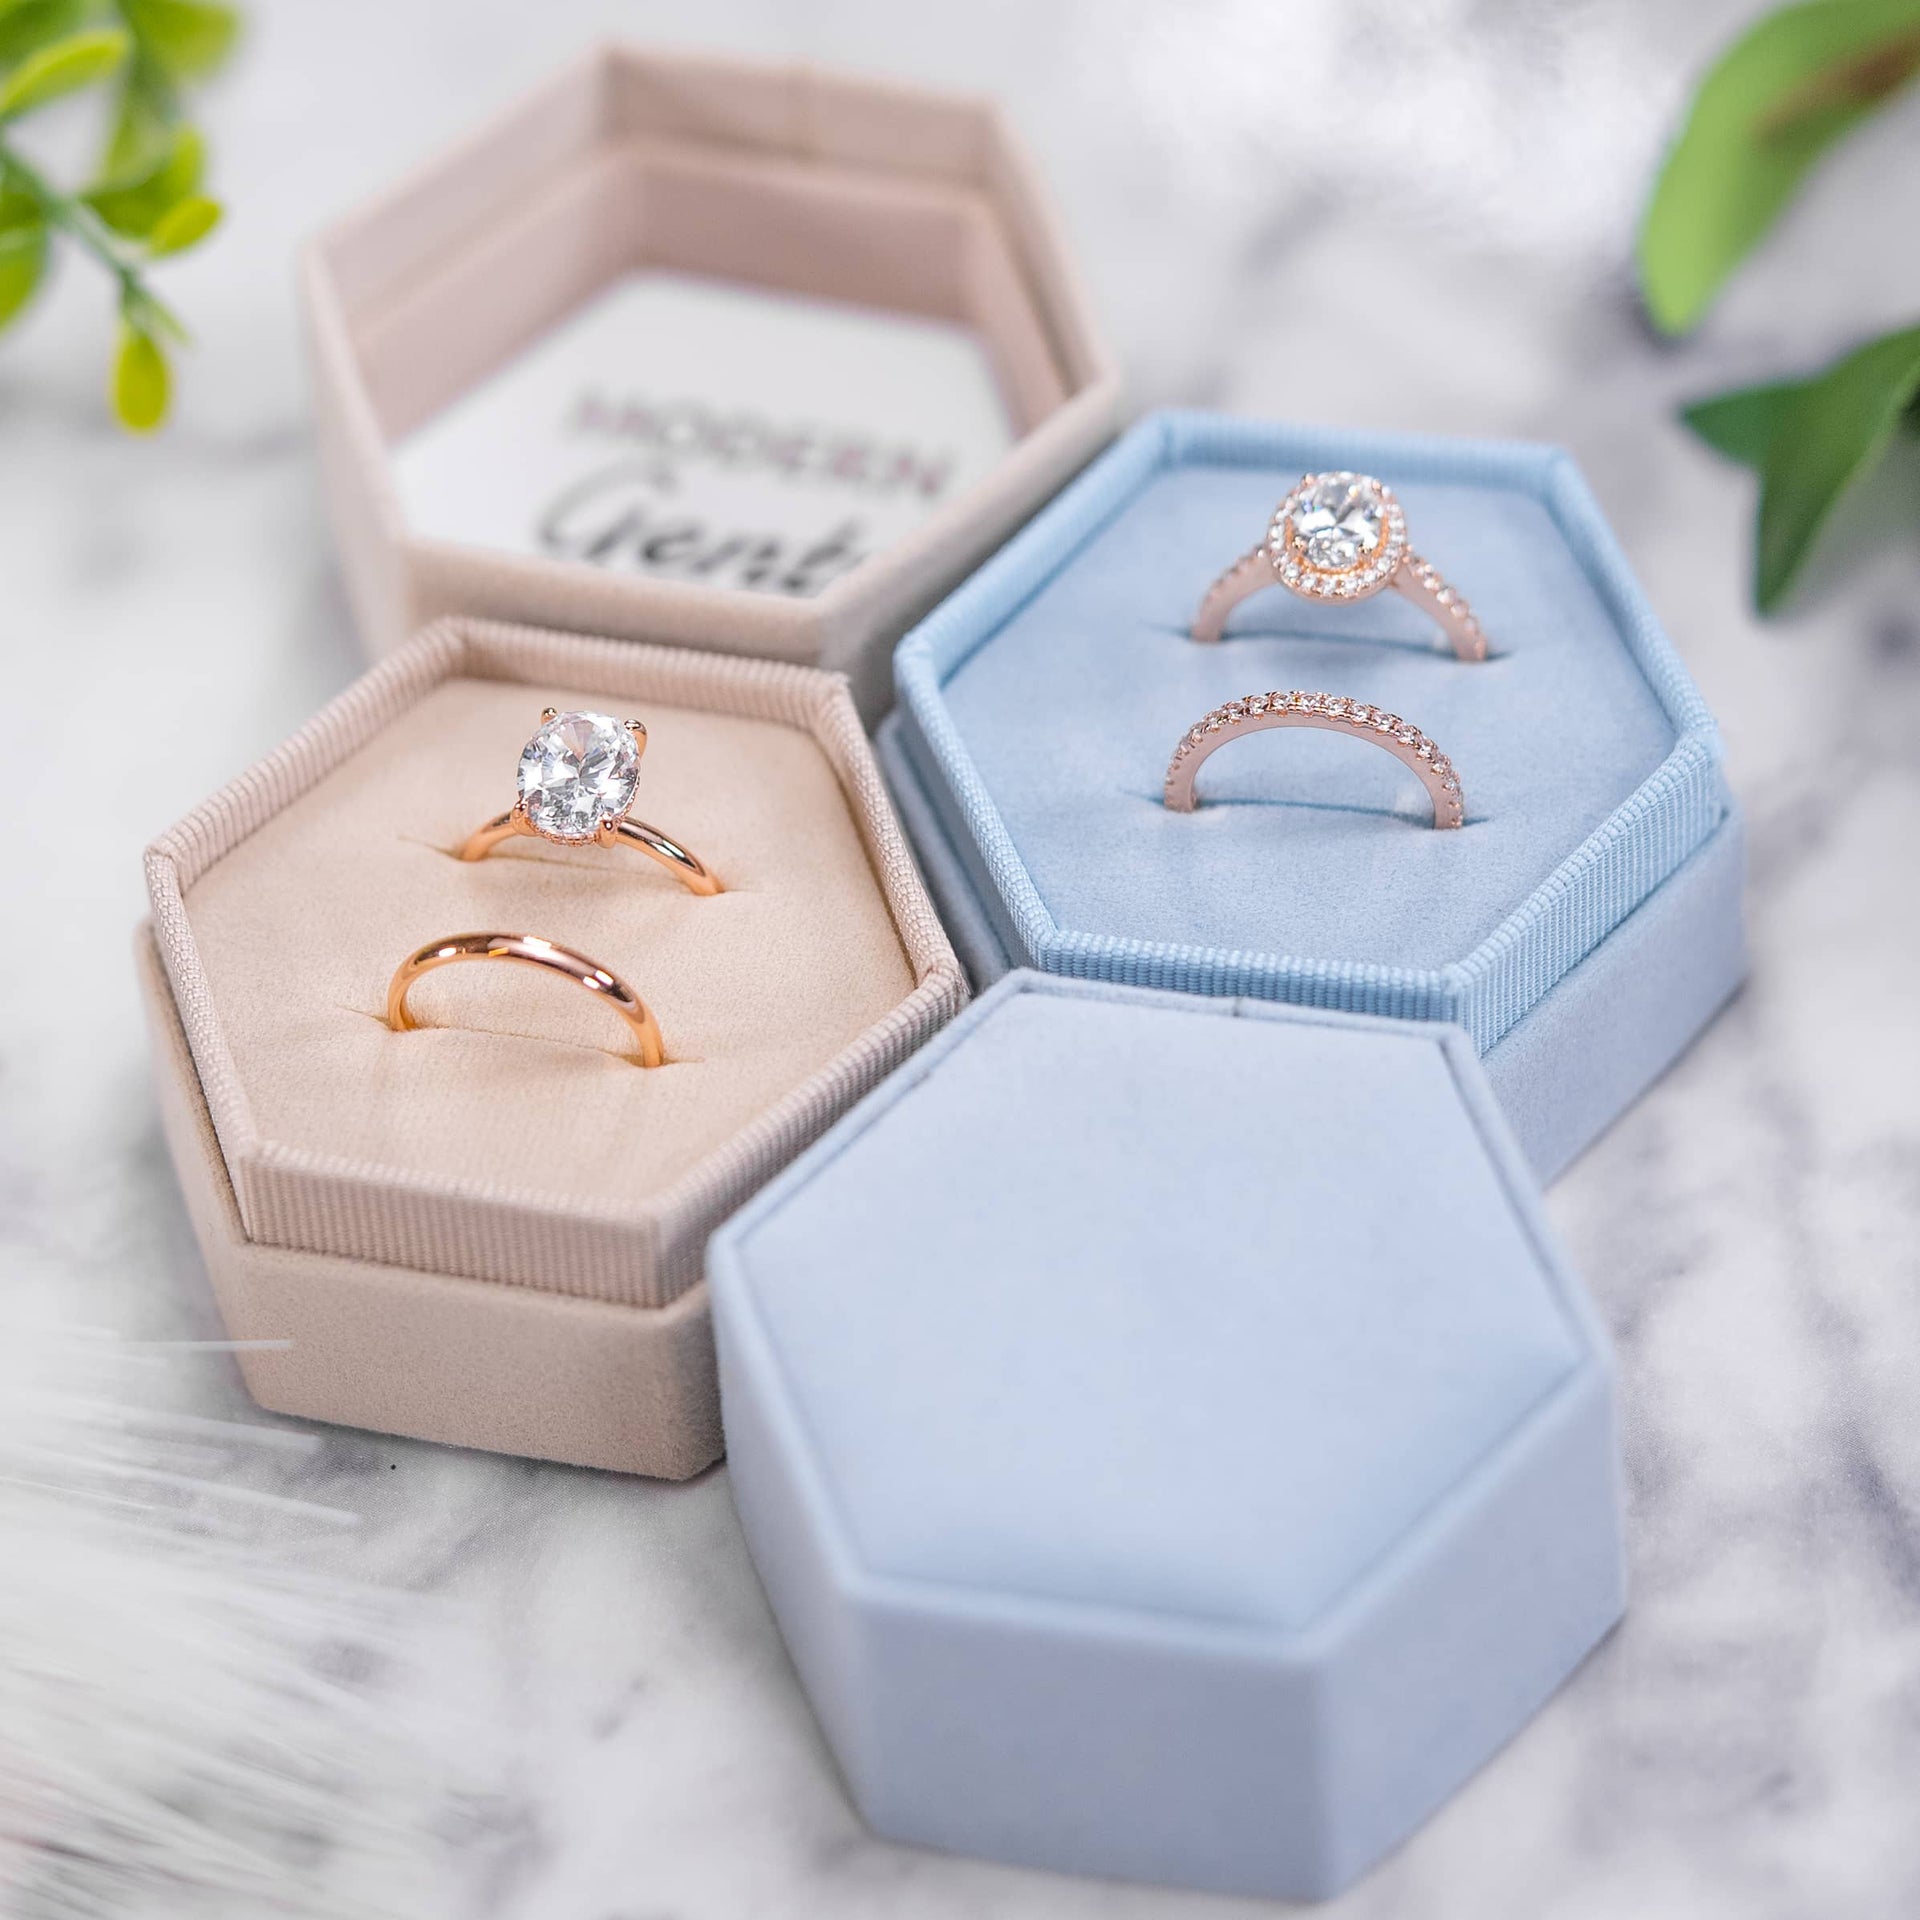 Hexagon colored ring boxes